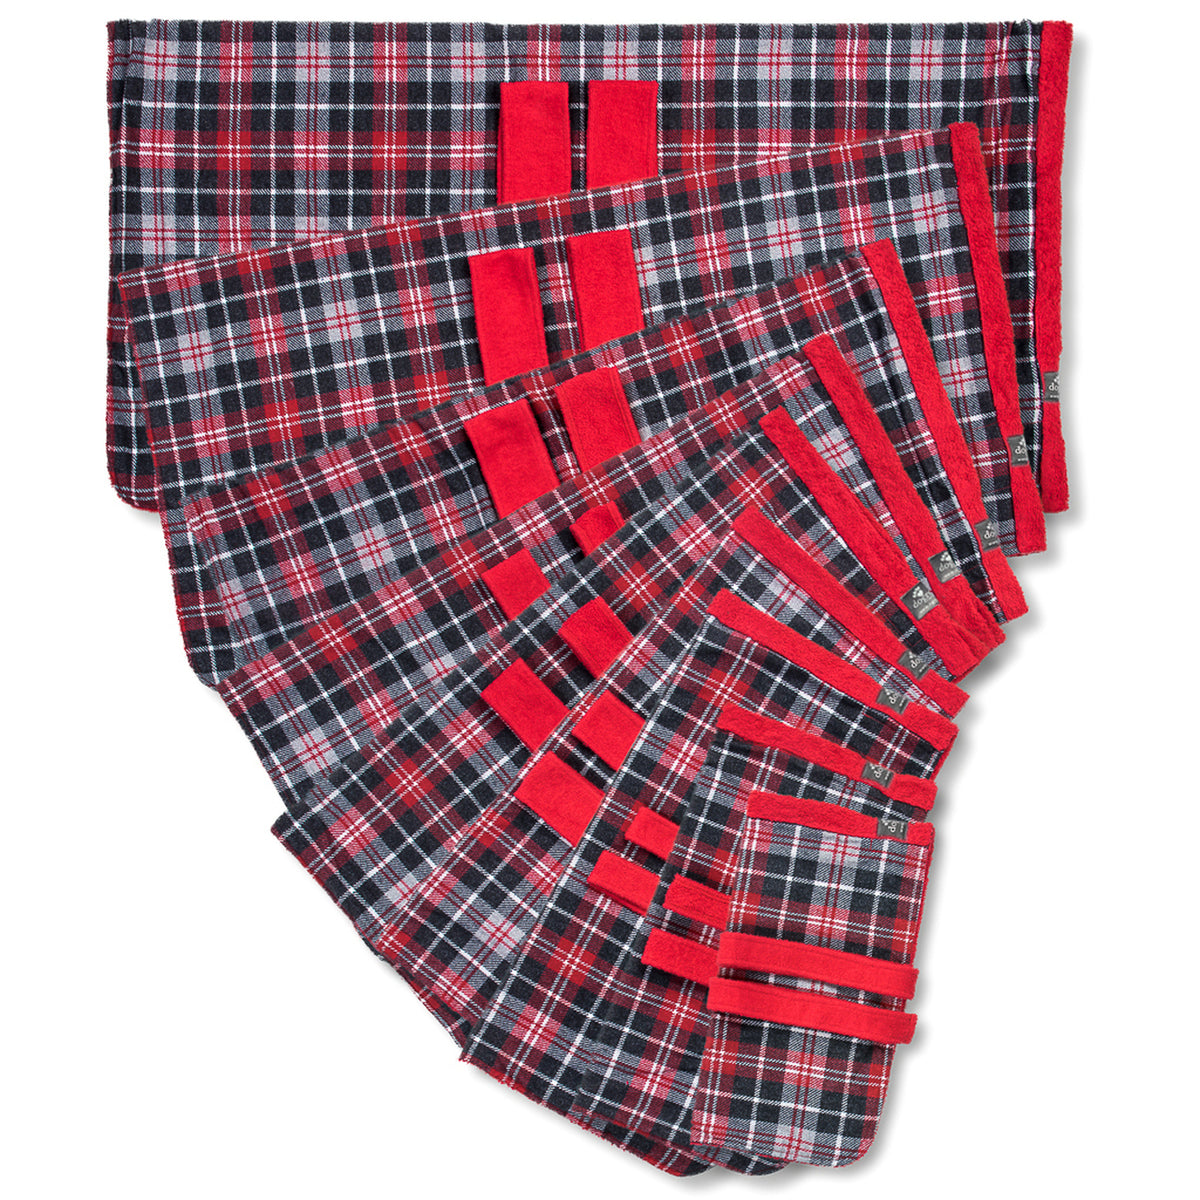 Stylish yet practical tartan drying Dogrobe is ideal for outdoor adventures, after swimming, training, working or bathing. Available in sizes Mini to XXXL.